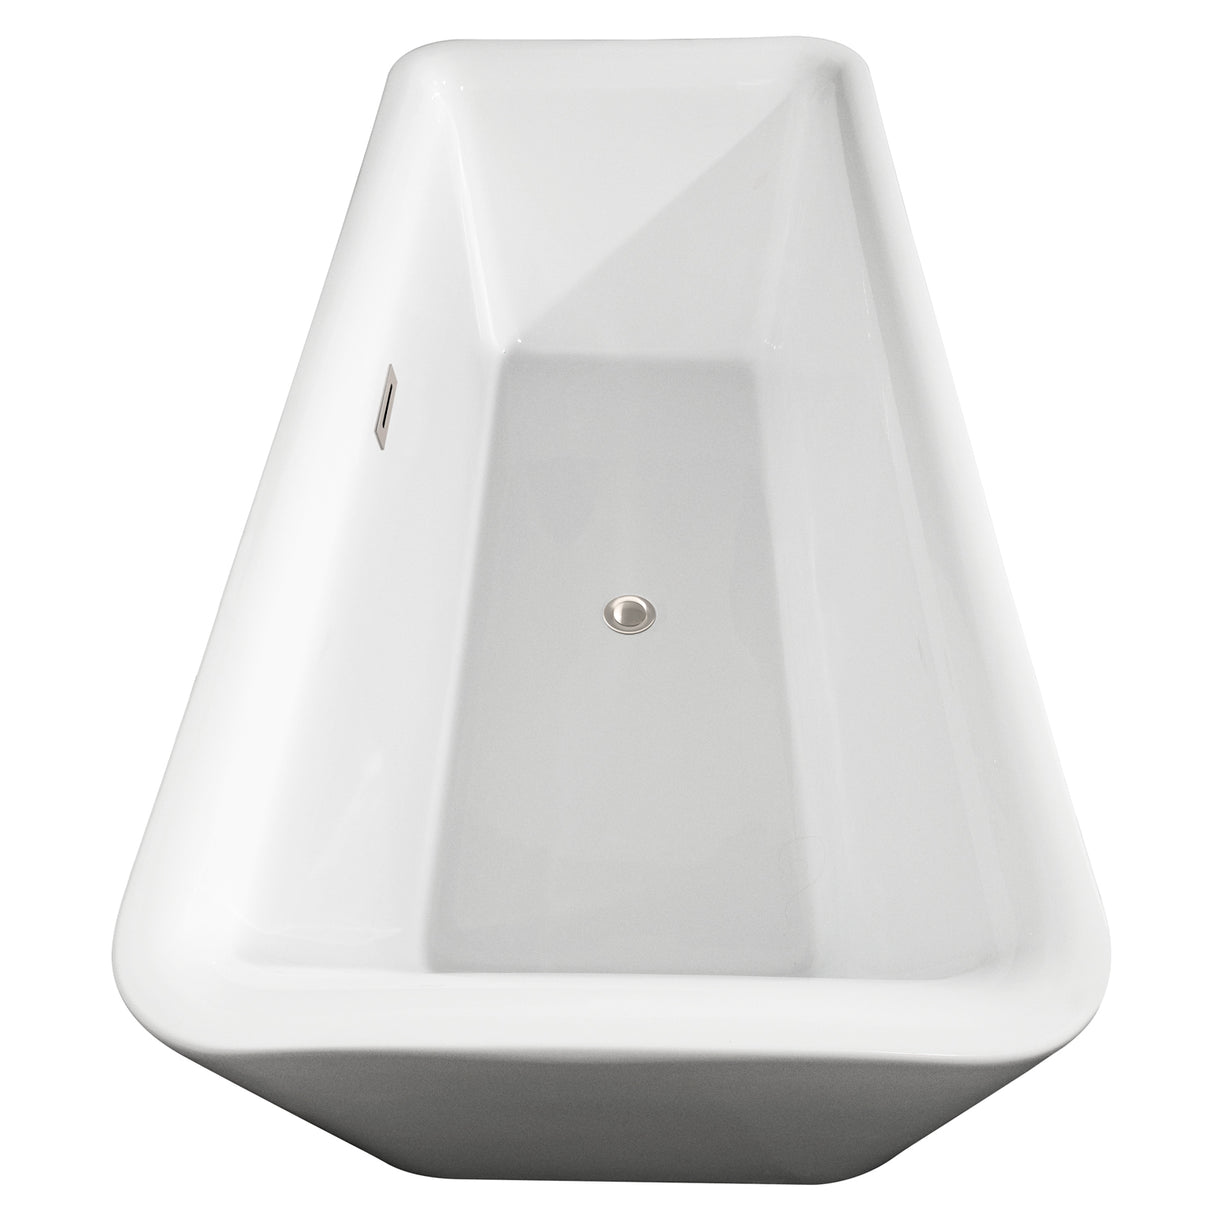 Emily 69 Inch Freestanding Bathtub in White with Brushed Nickel Drain and Overflow Trim